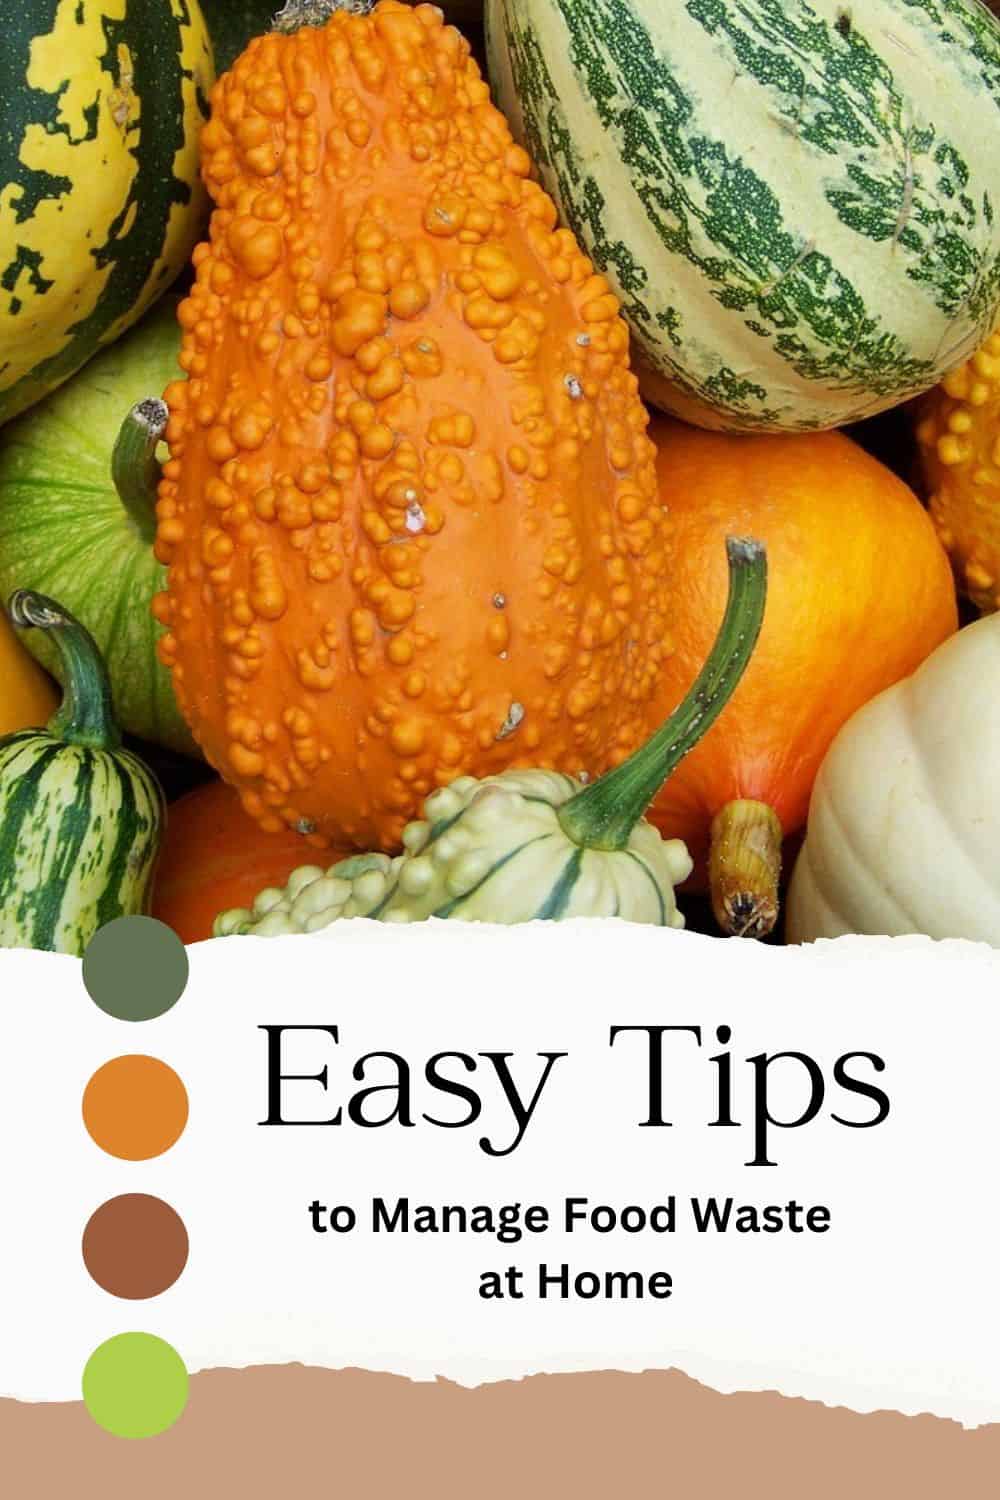 tips to manage food waste text with image of squashes